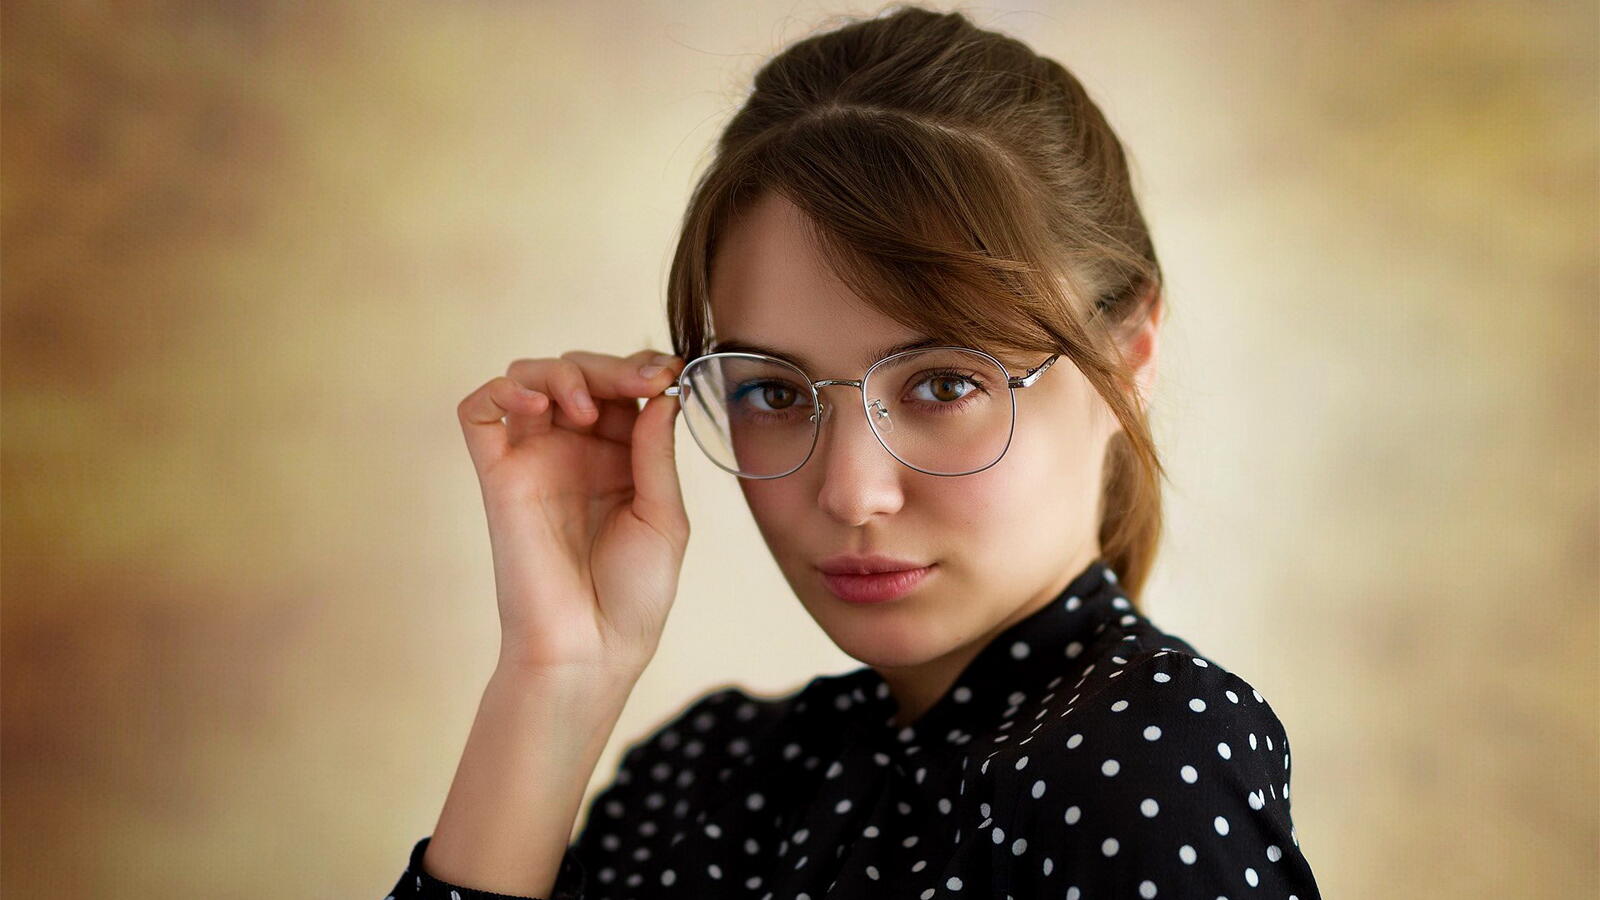 Free photo Portrait of a girl with glasses